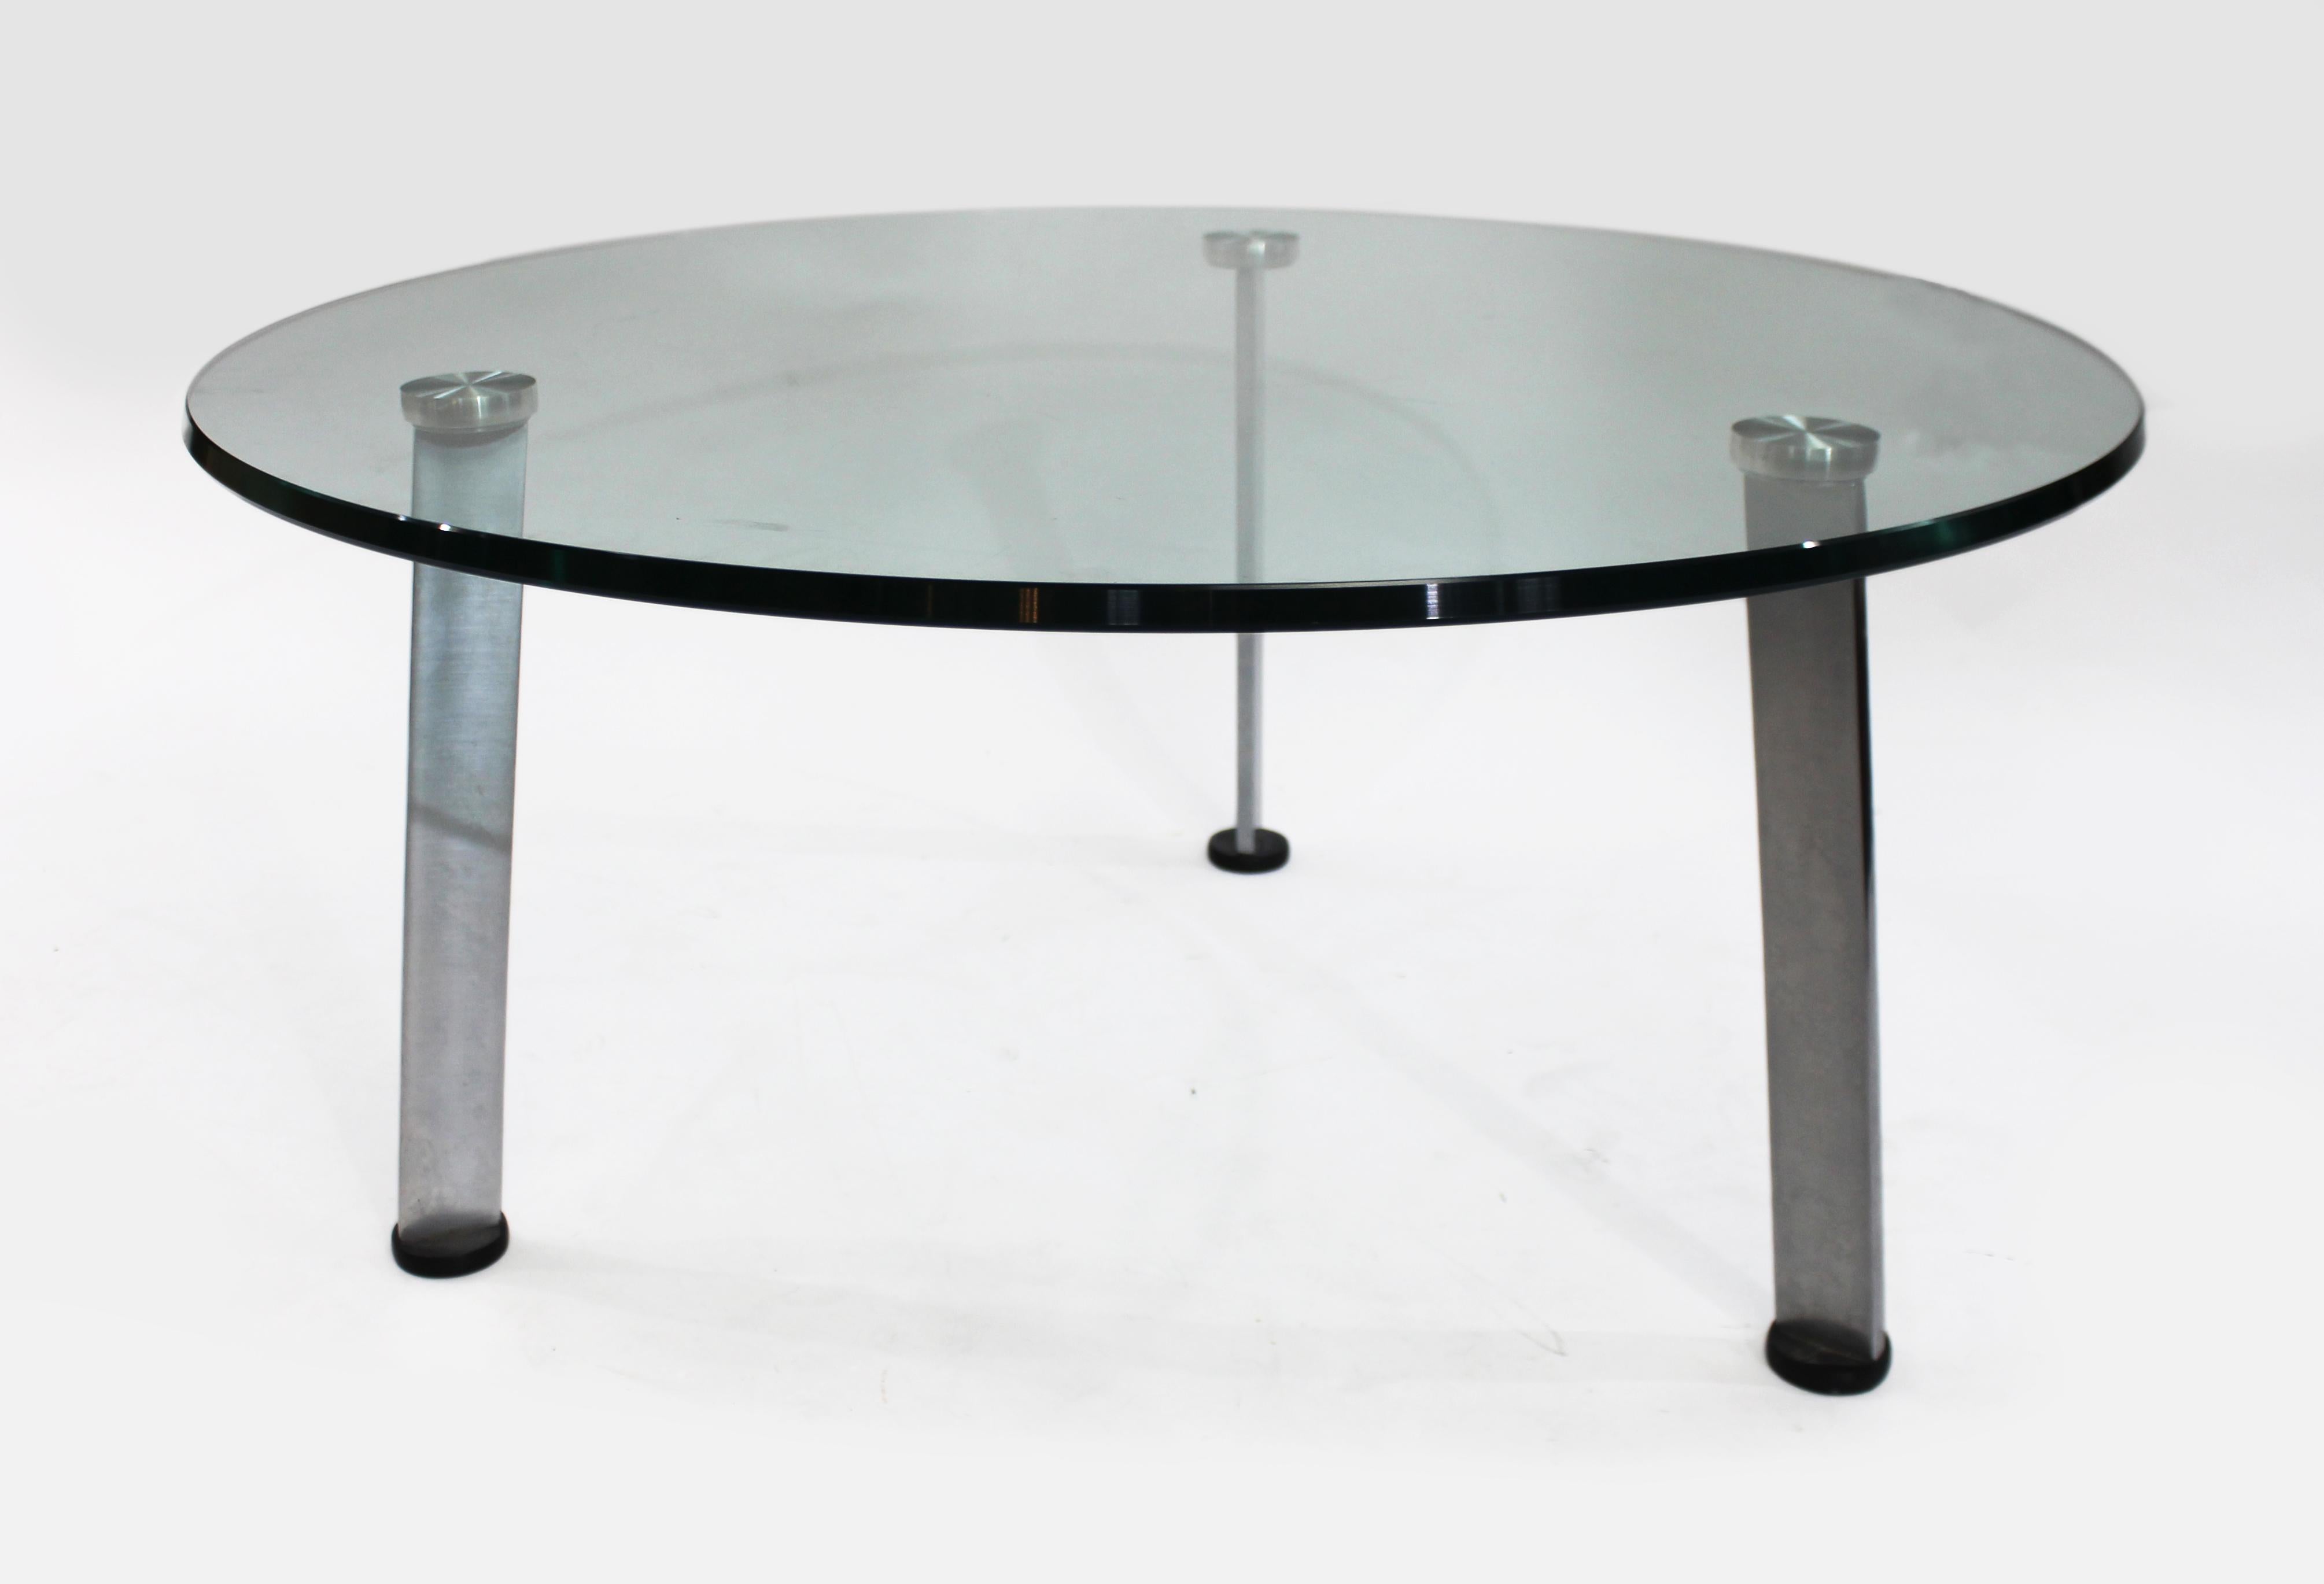 Heavy designer glass topped chrome circular coffee table


Measures: Top diameter 90 cm 35 1/4 in 

Height 42 cm 16 1/2 in 
 

Composition Heavy glass top with chrome legs

Condition Very sound structure. Heavy glass top, a few scratches